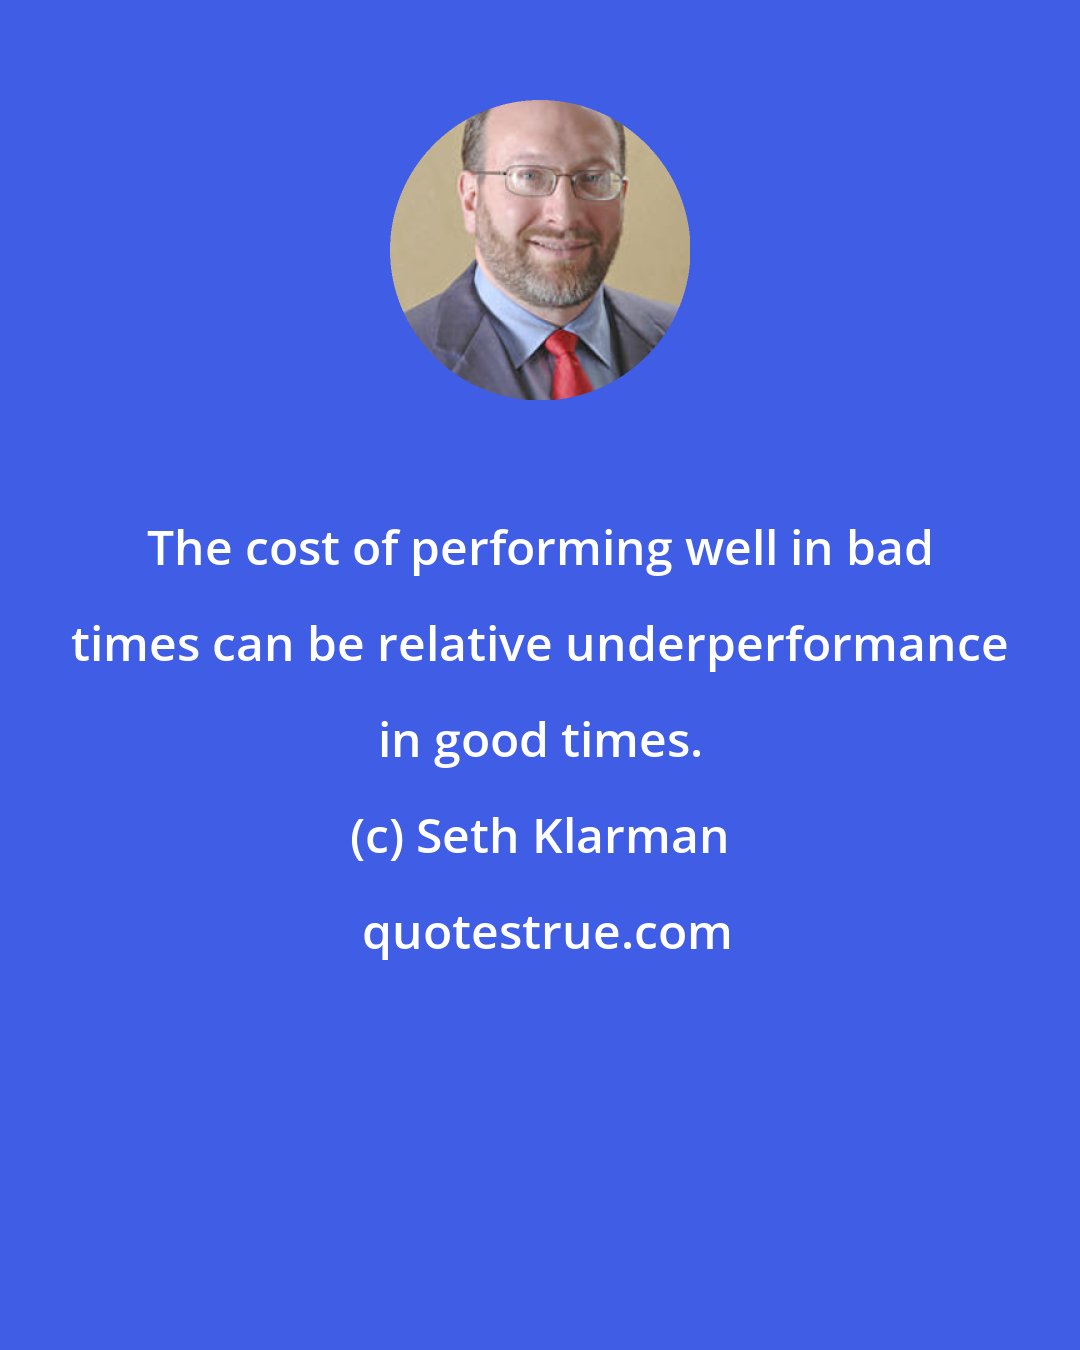 Seth Klarman: The cost of performing well in bad times can be relative underperformance in good times.